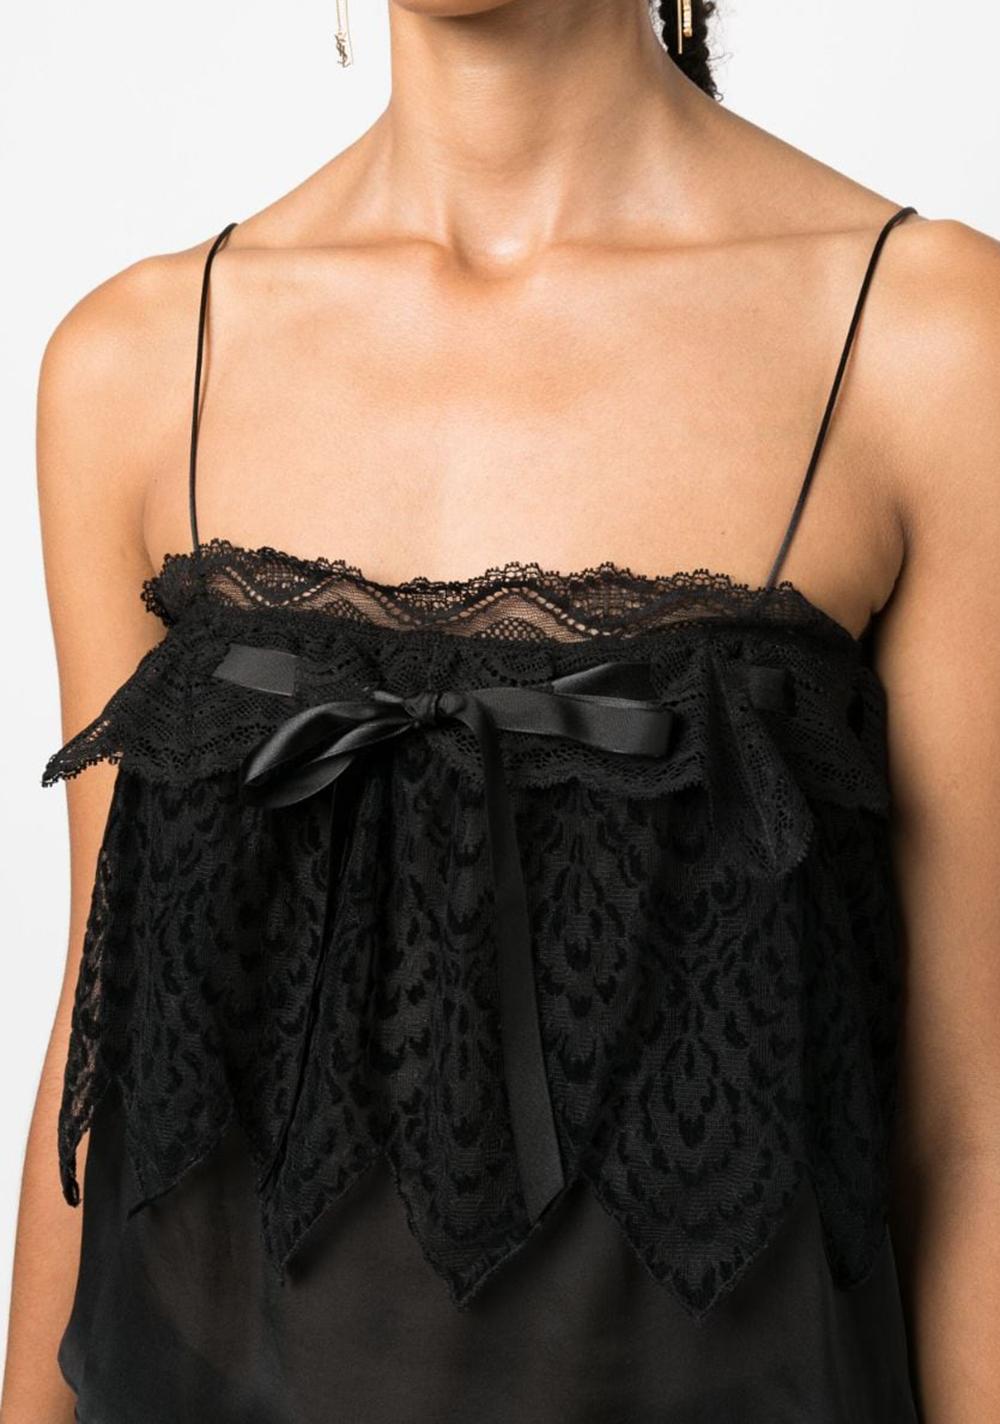 Yves Saint Laurent  lace-panelled spaghetti-straps top featuring bow detailing, spaghetti straps, straight hem.
Circa 2000s
Composition: 100% silk
Label size M
Made in France. 
In good vintage condition. 
We guarantee you will receive this gorgeous